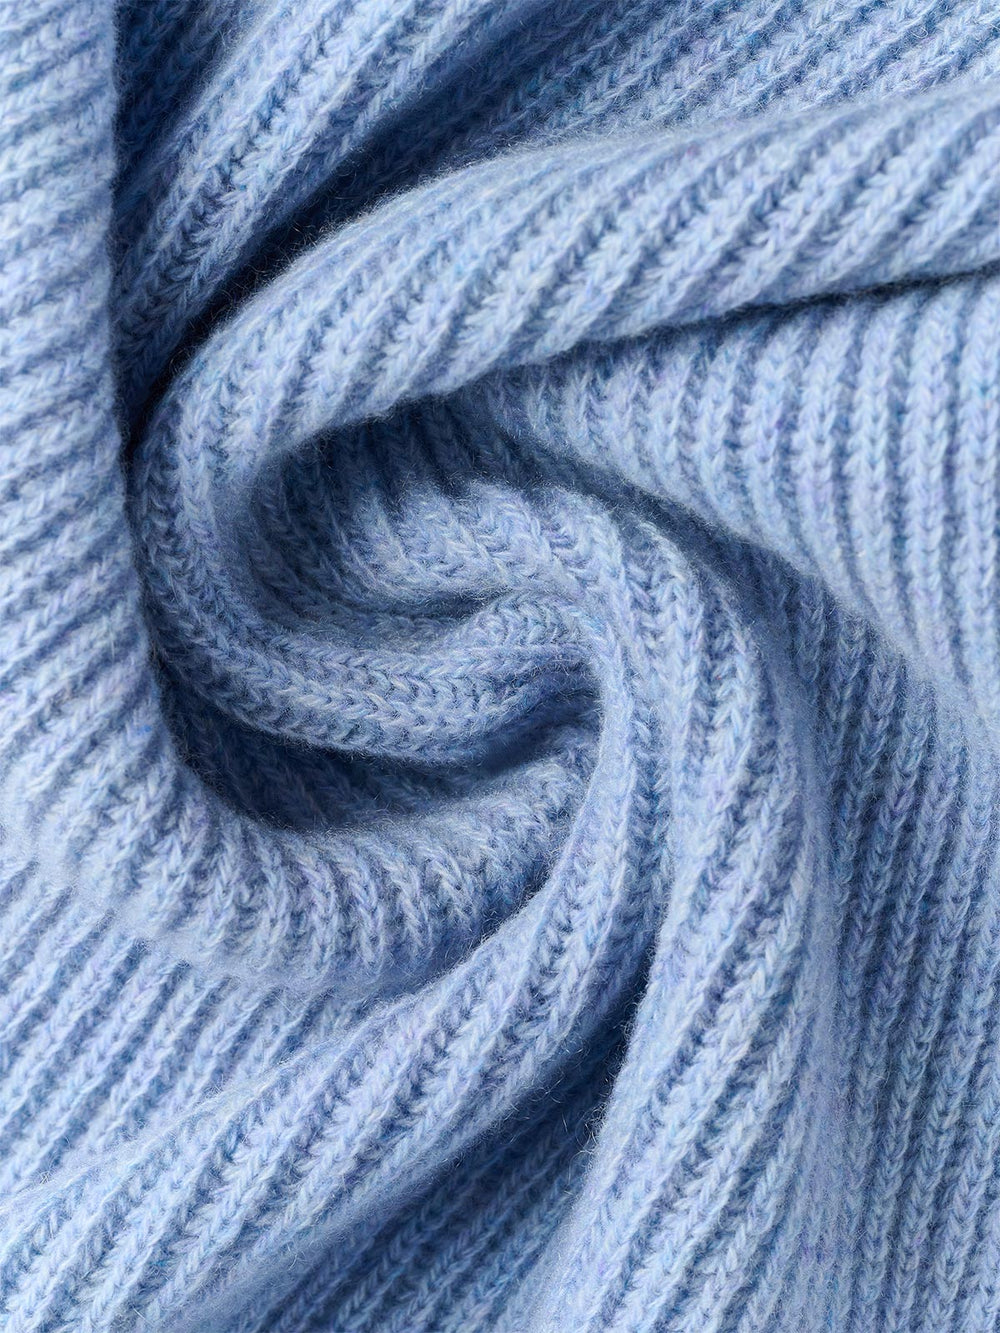 The Blue Cashmere Scarf